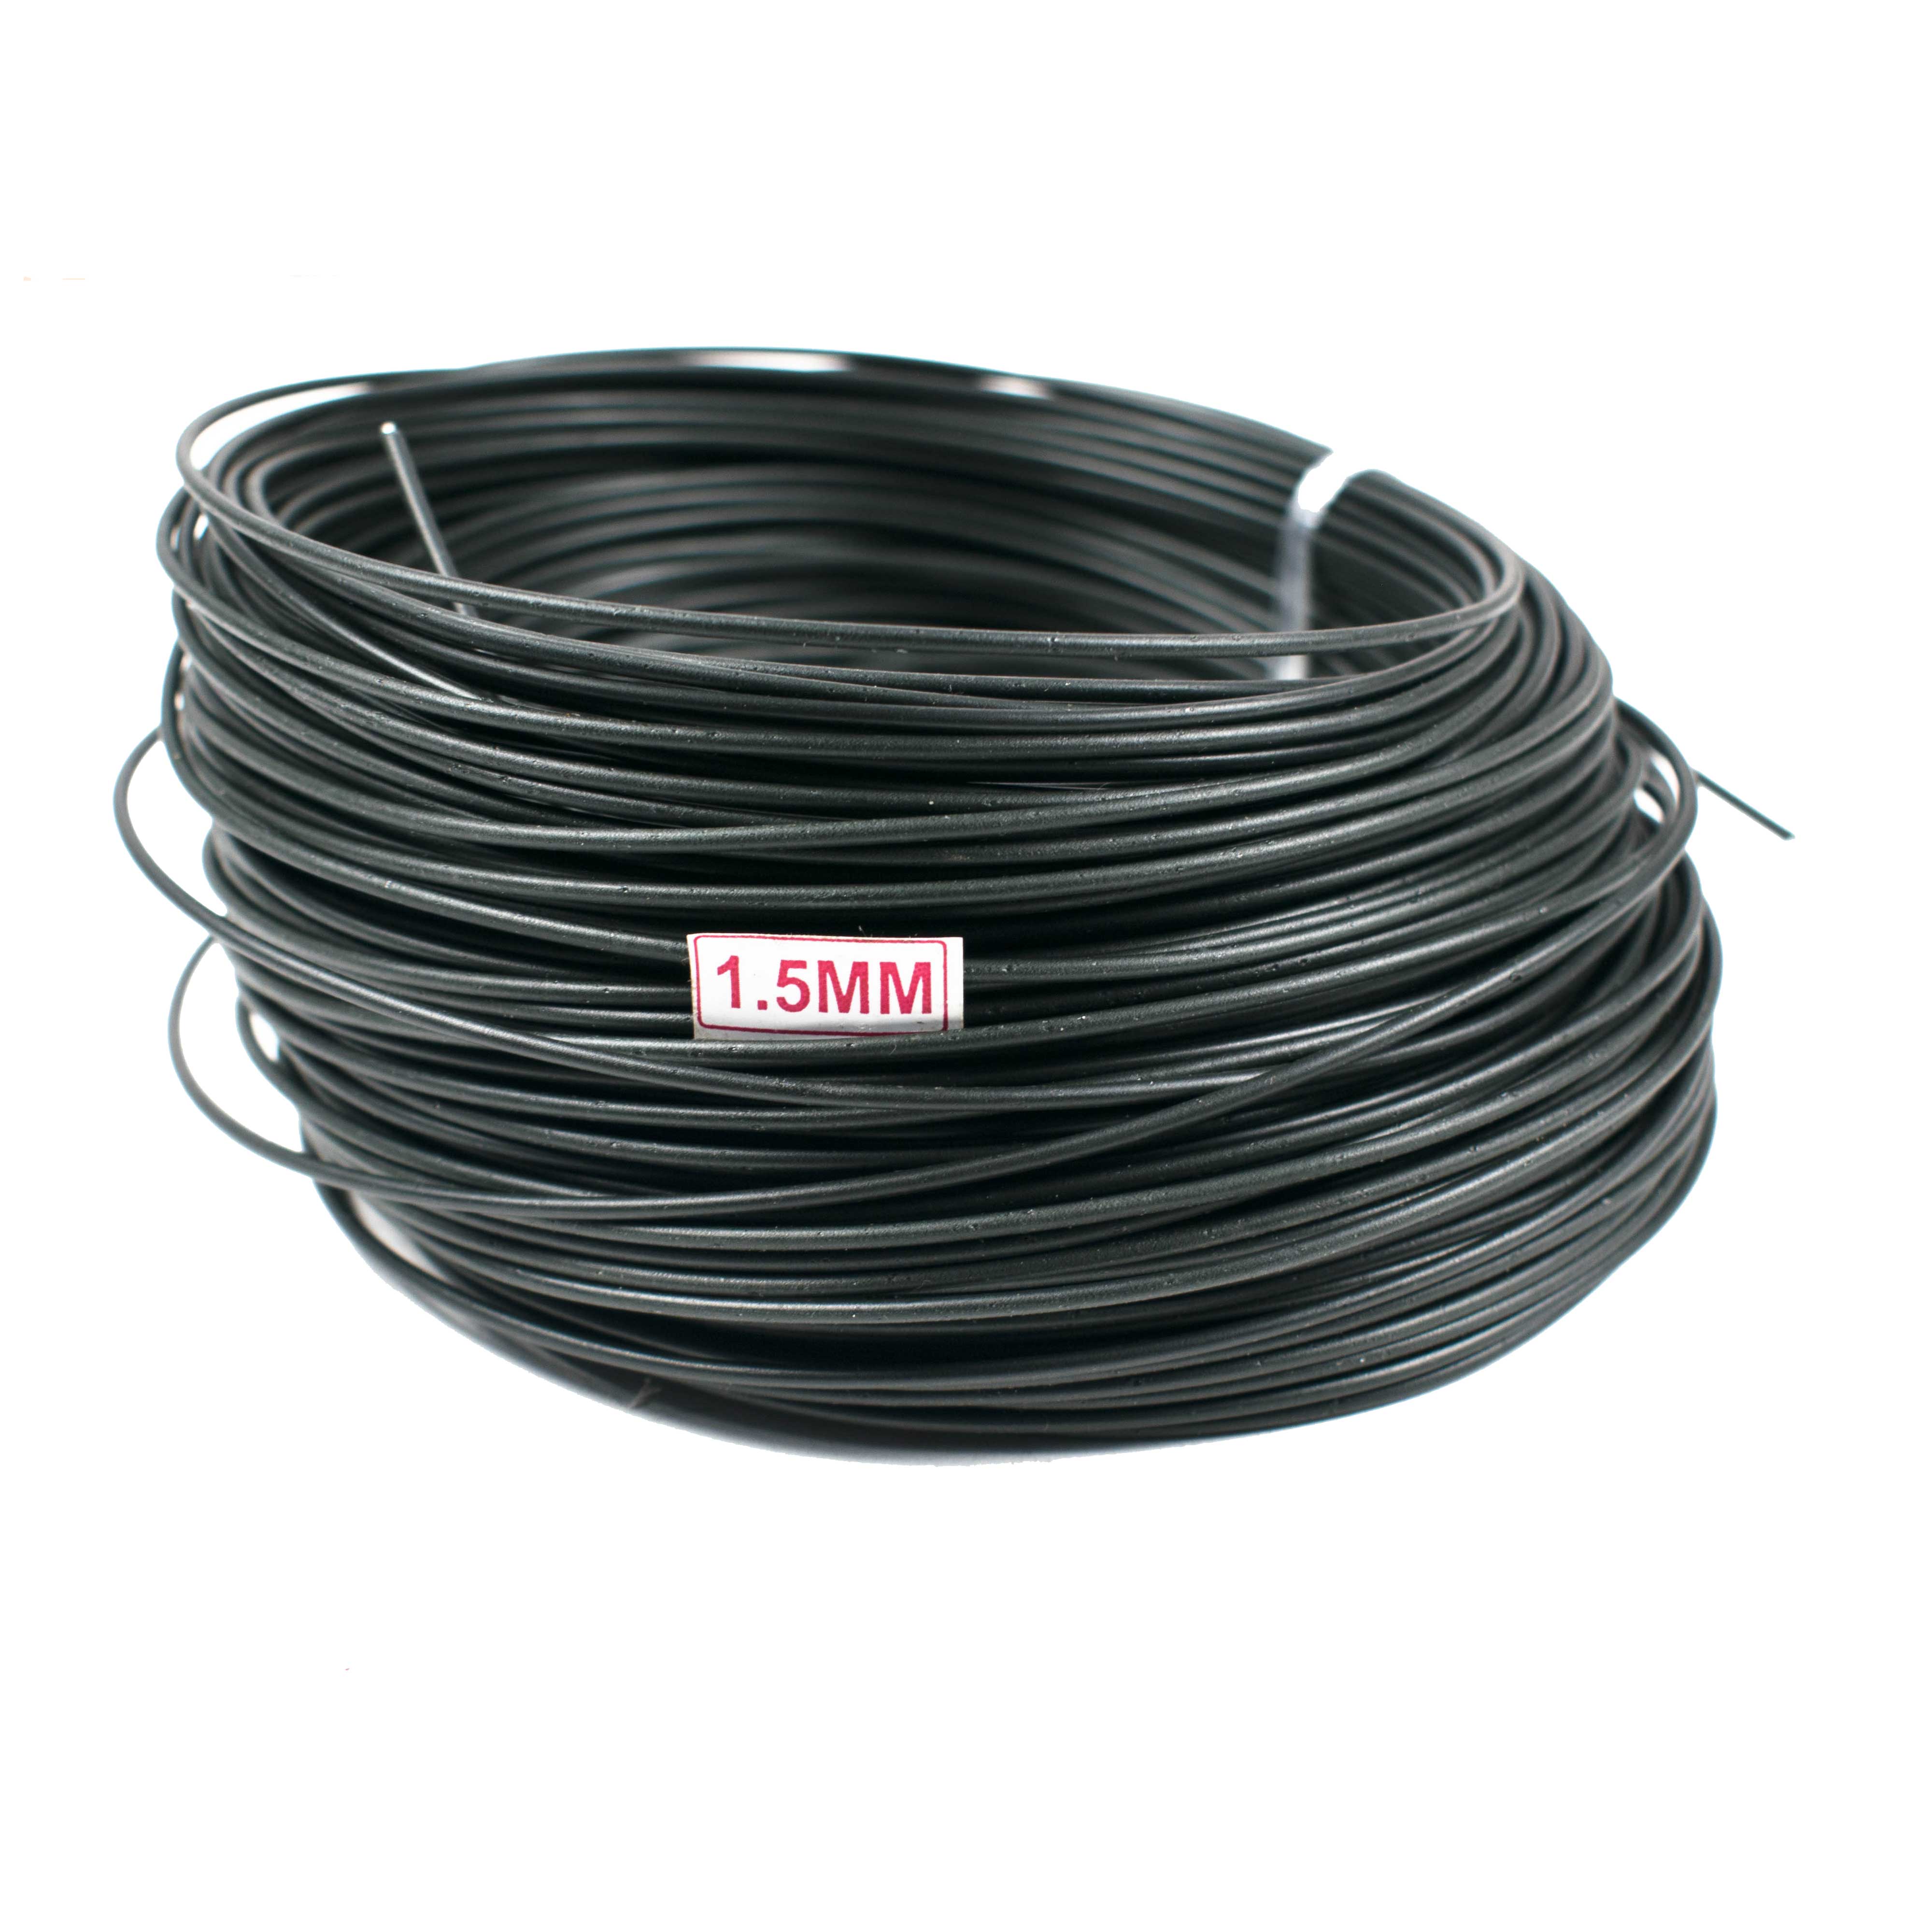 Buy PVC Coated Iron Support Wire (80 Meter) at